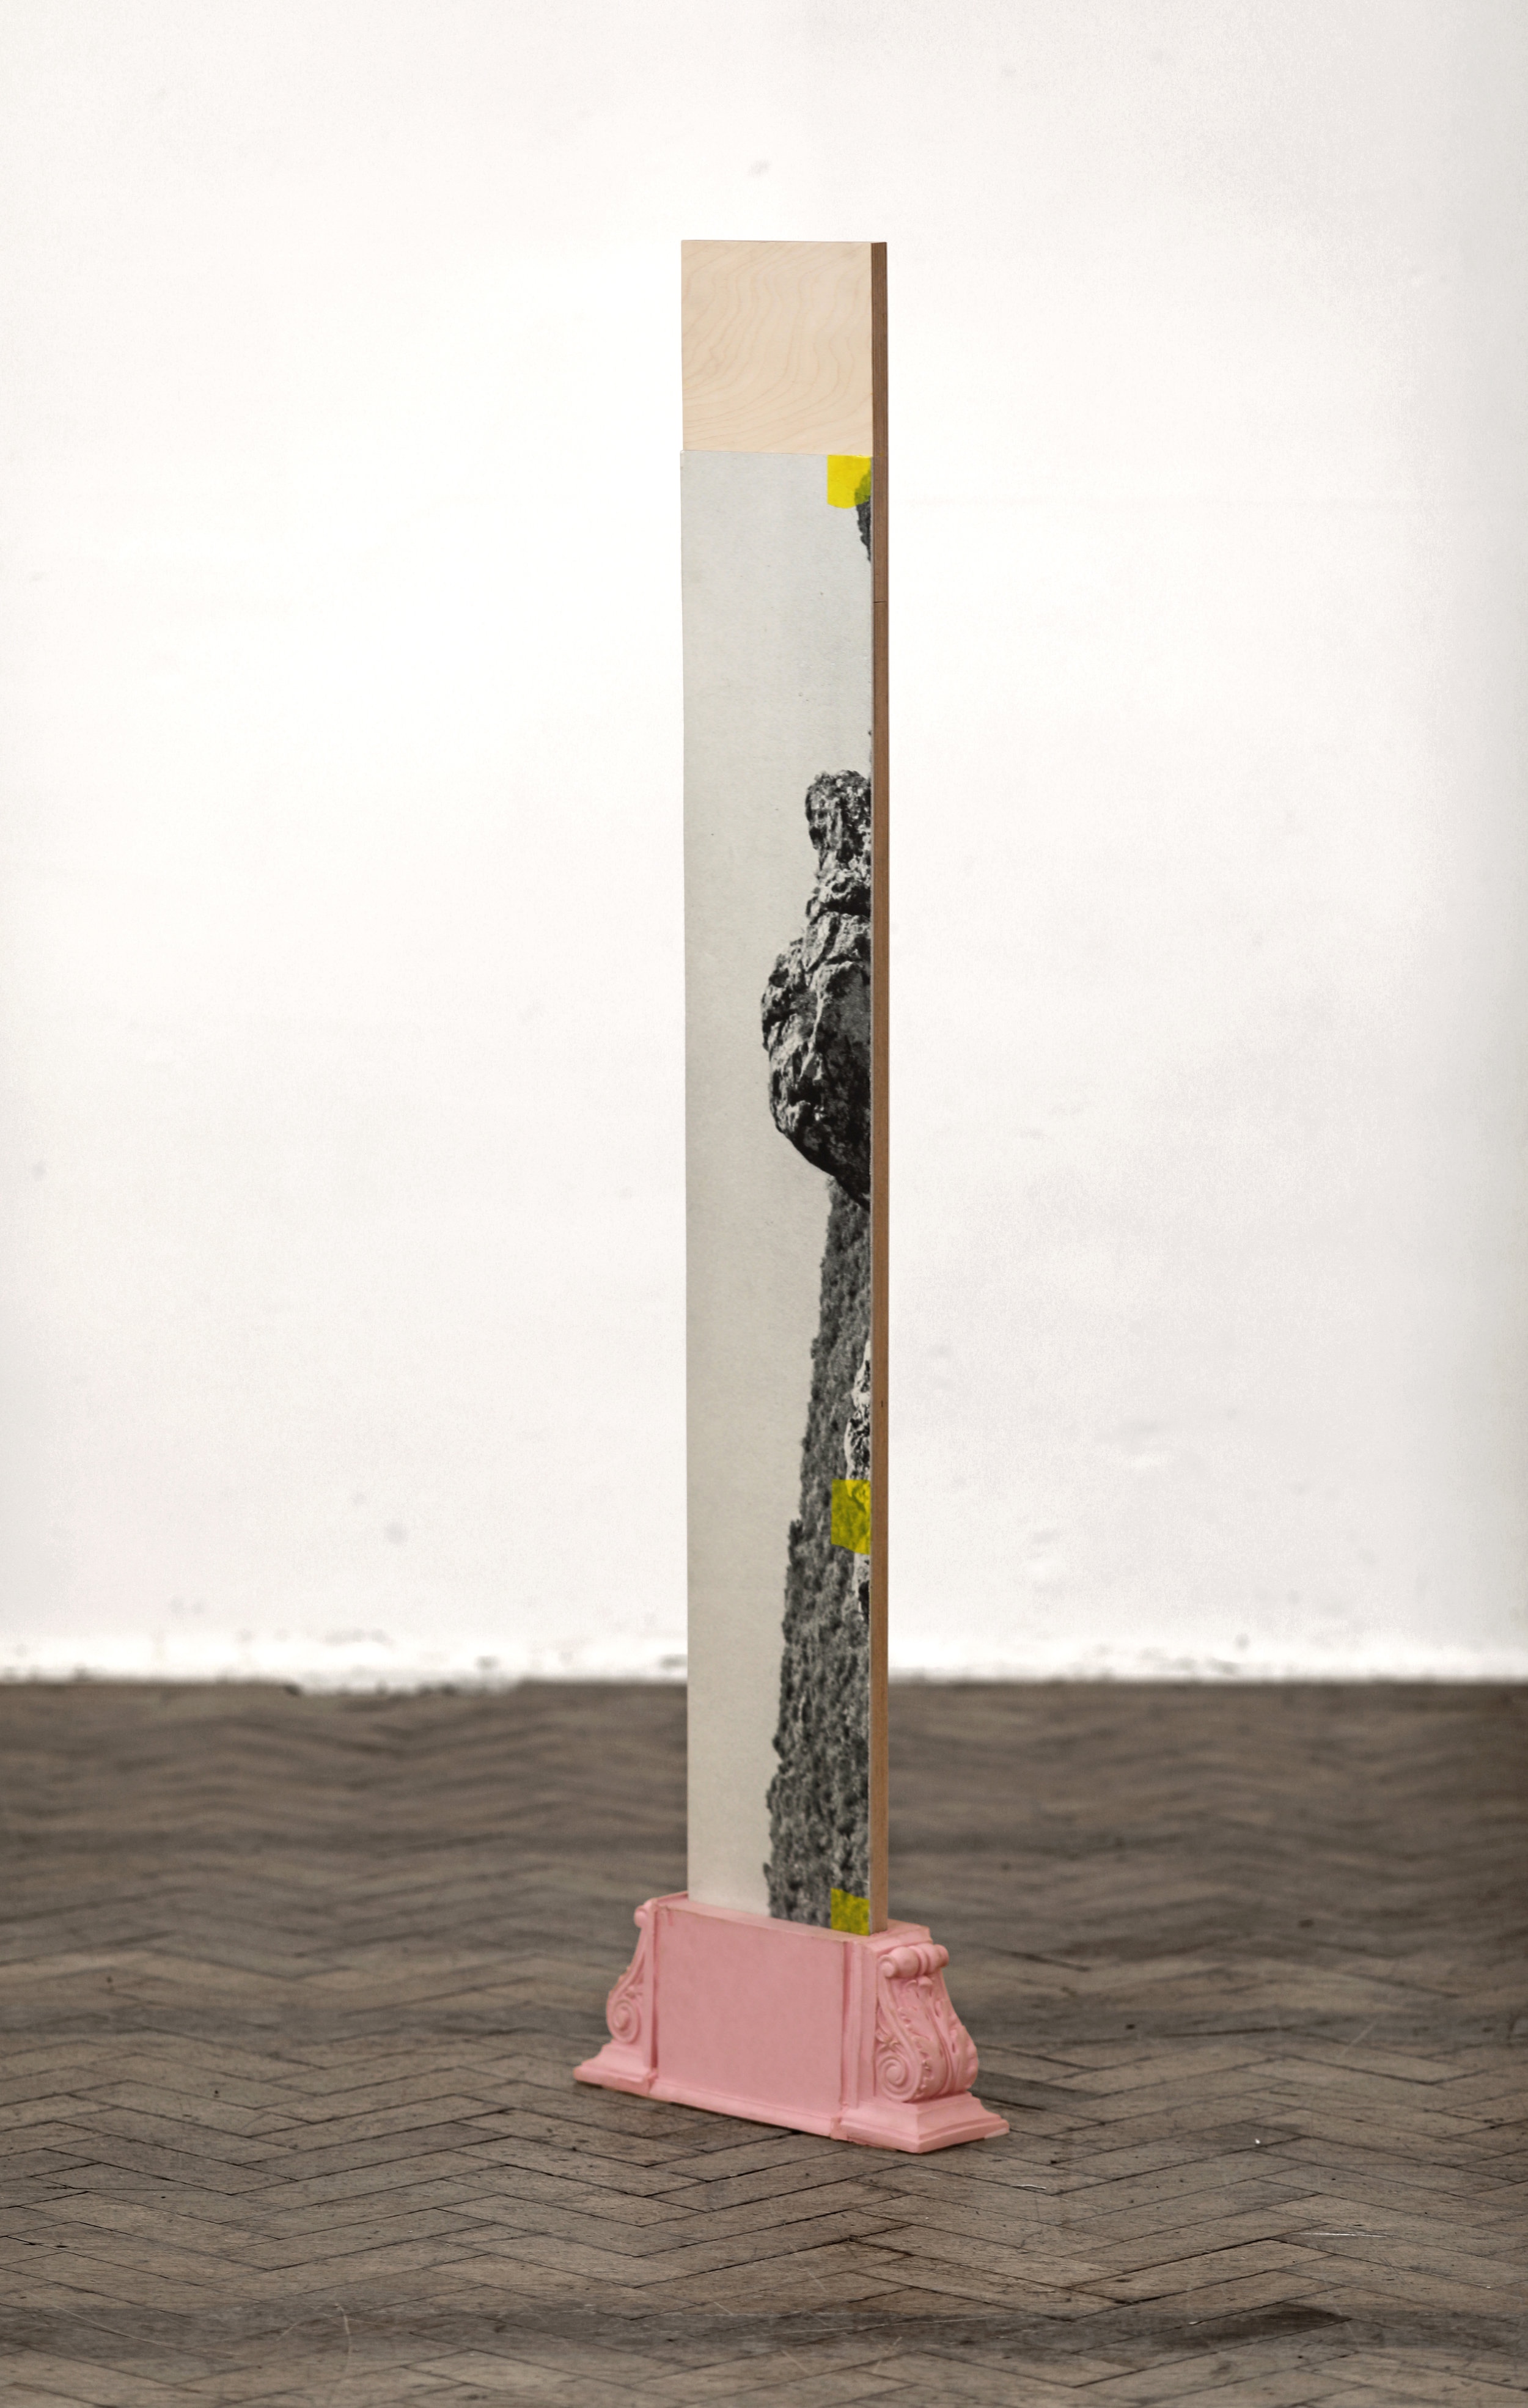   what is not, or is no longer, or is not yet   Hahnemüle print, silicon, tape, aluminium and birch plywood  153 x 40 x 11 cm  2019 